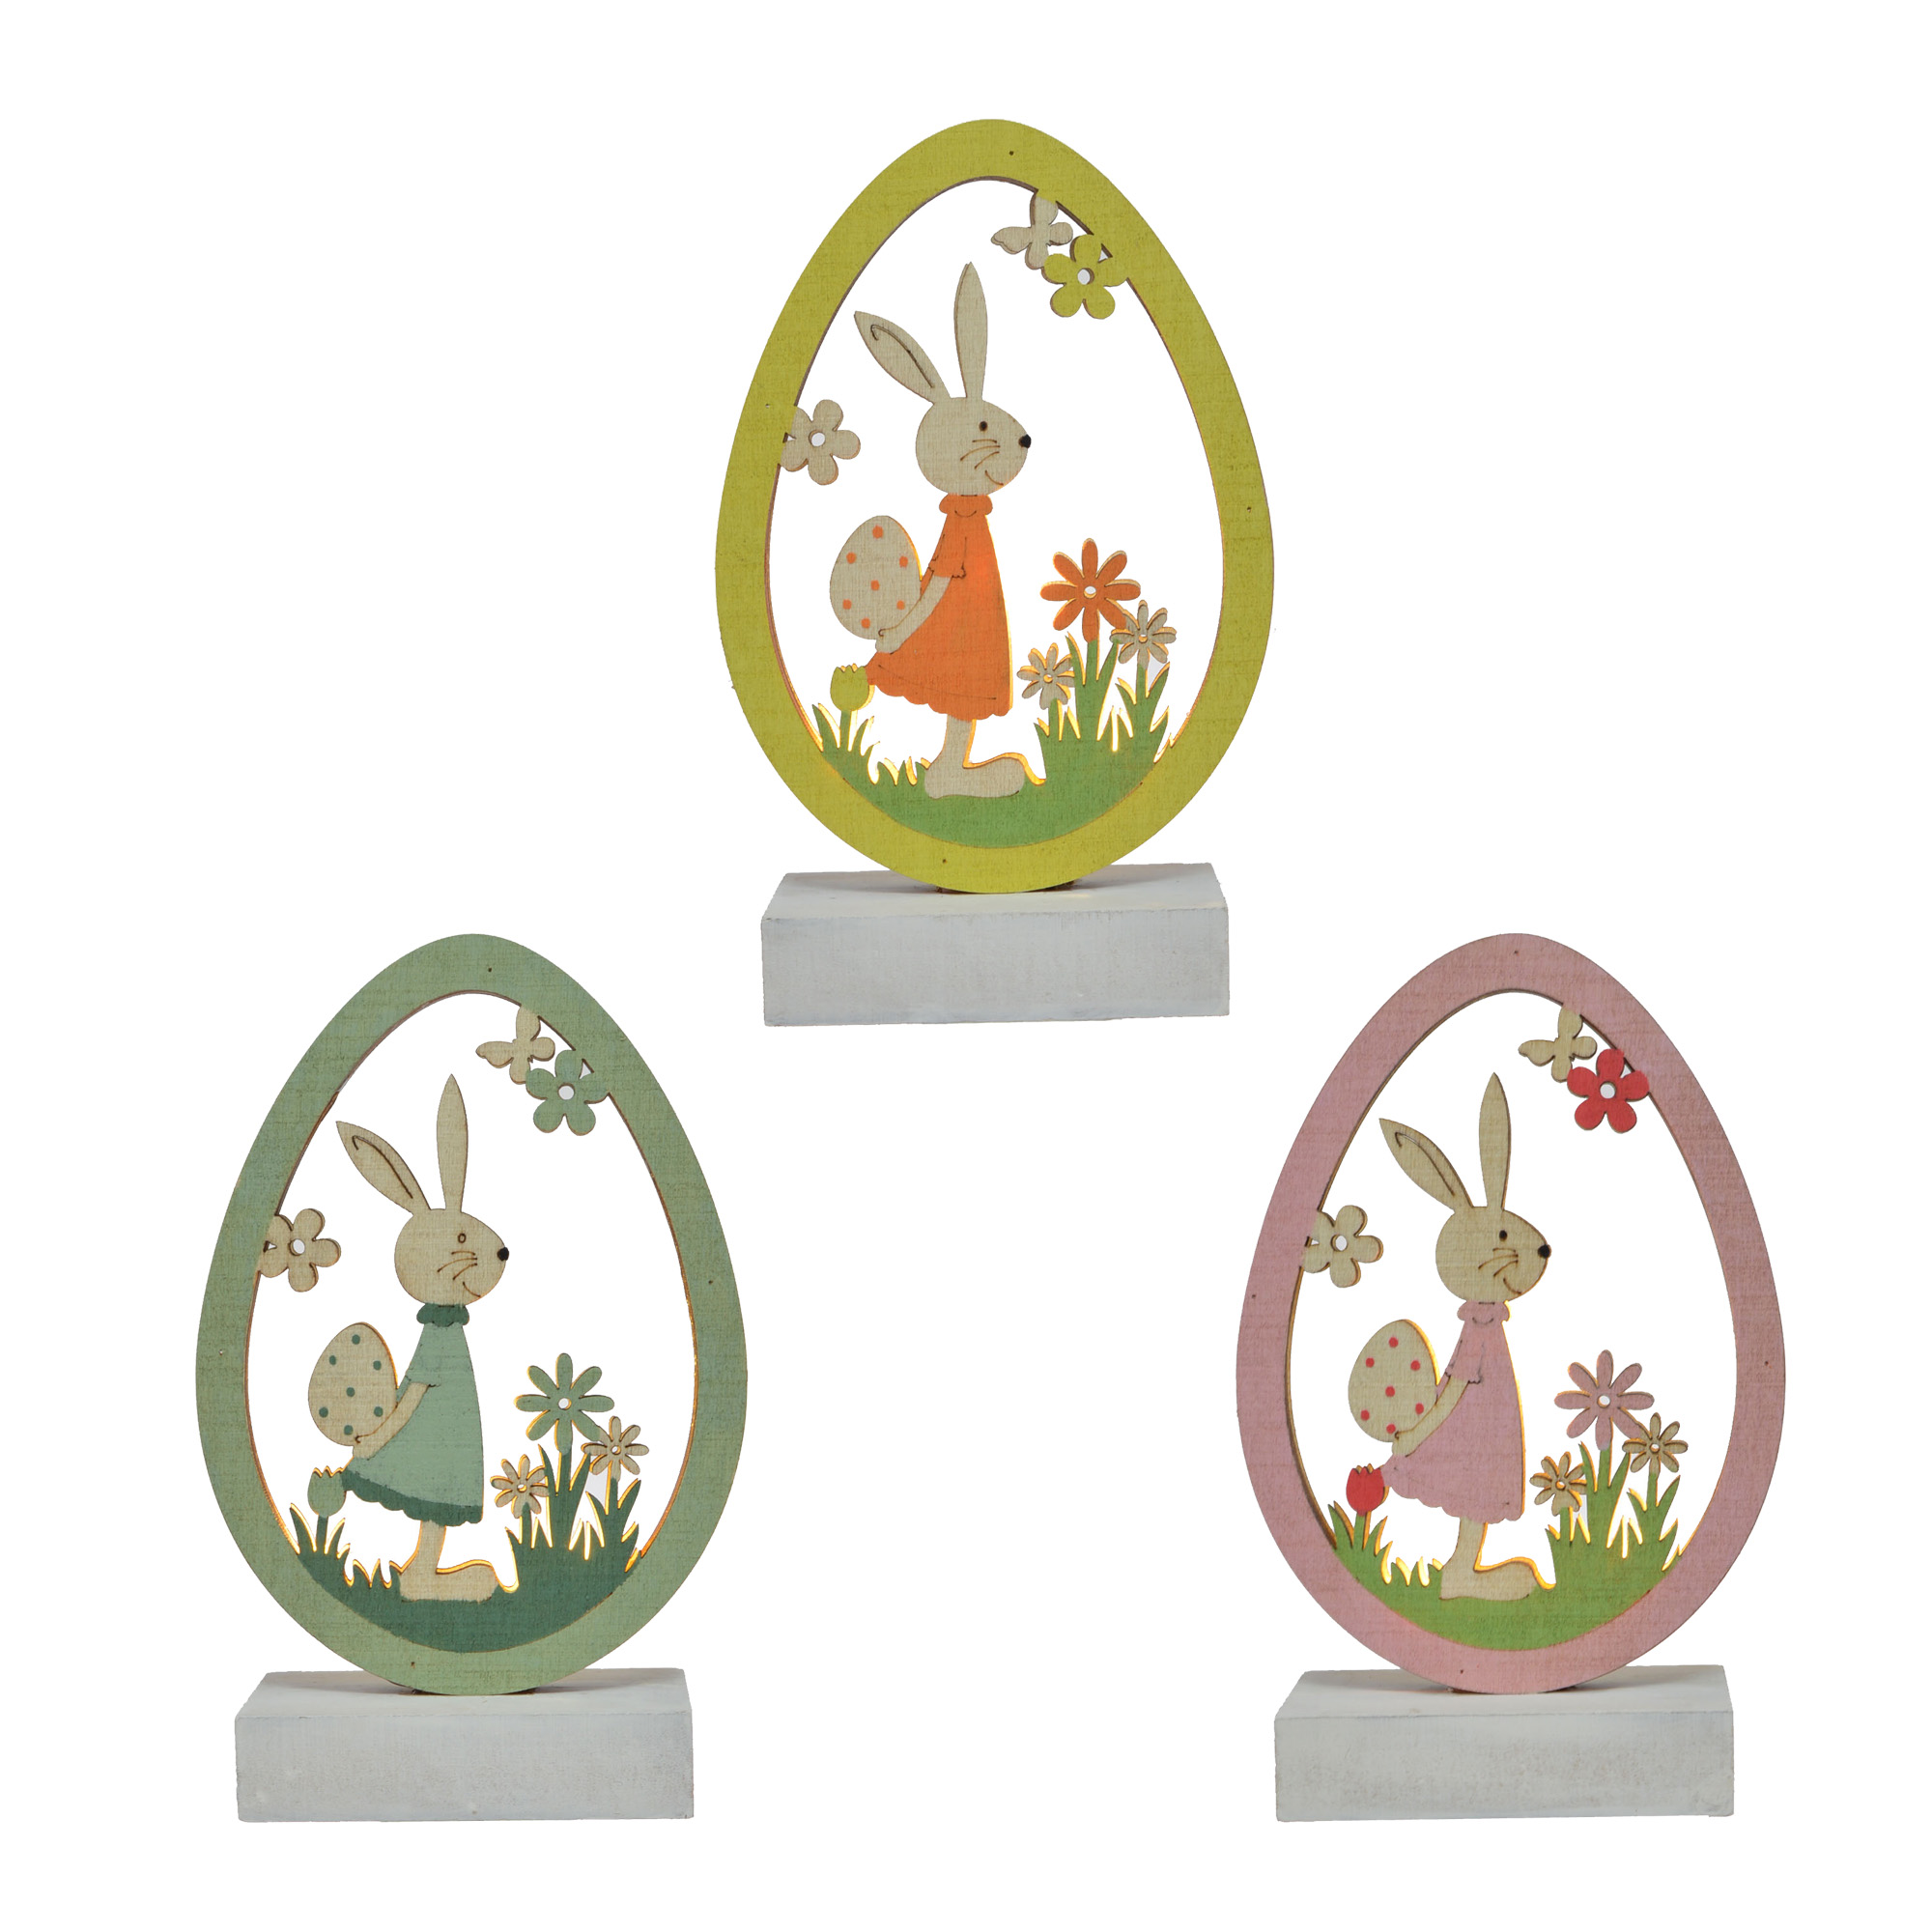 Wholesale Easter LED Wood Ornaments Egg Shape With Bunny Rabbit For Easter Party Tabletop Decorations